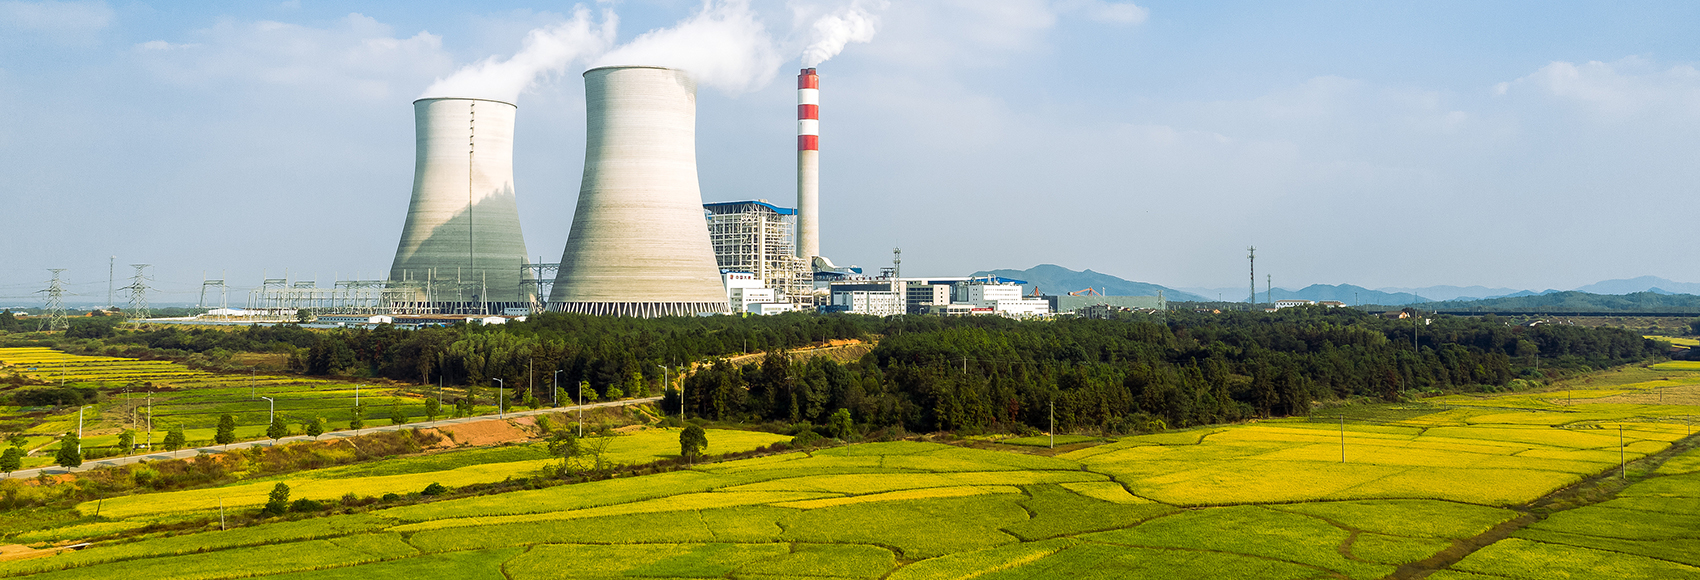 Surging Uranium Prices Highlight Nuclear Energy’s Growing Role in Sustainable Development